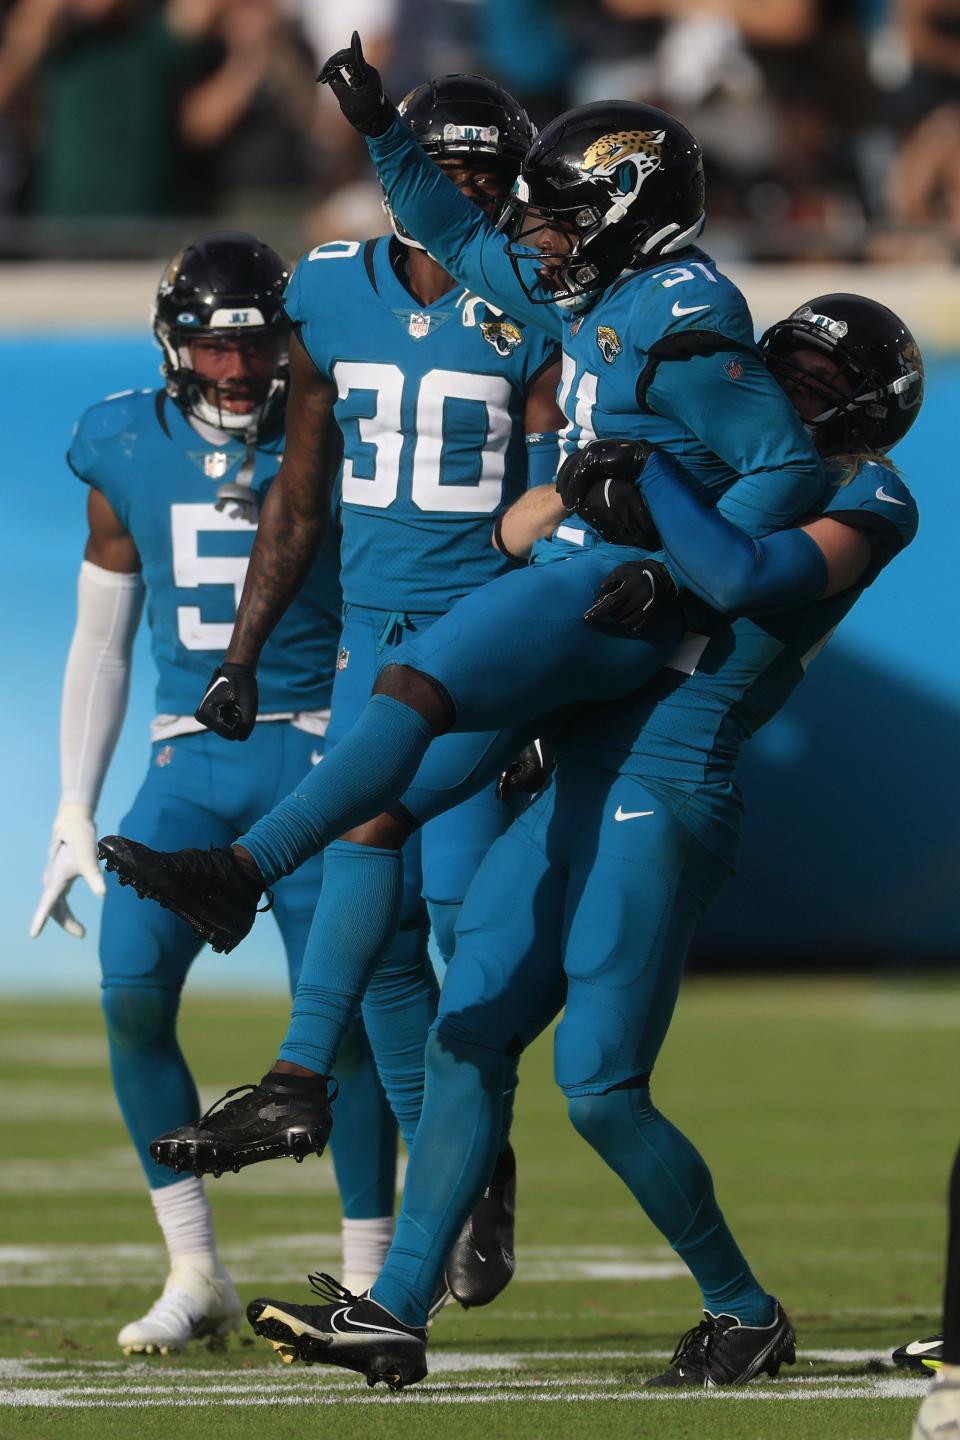 Jacksonville Jaguars cornerback Darious Williams (31) is congratulated by safety Andrew Wingard (42) after breaking up a pass play on 4th down as cornerback Montaric Brown (30) and Jacksonville Jaguars safety Andre Cisco (5) look on during the fourth quarter of a regular season NFL football matchup Sunday, Nov. 6, 2022 at TIAA Bank Field in Jacksonville. The Jacksonville Jaguars held off the Las Vegas Raiders 27-20. [Corey Perrine/Florida Times-Union]